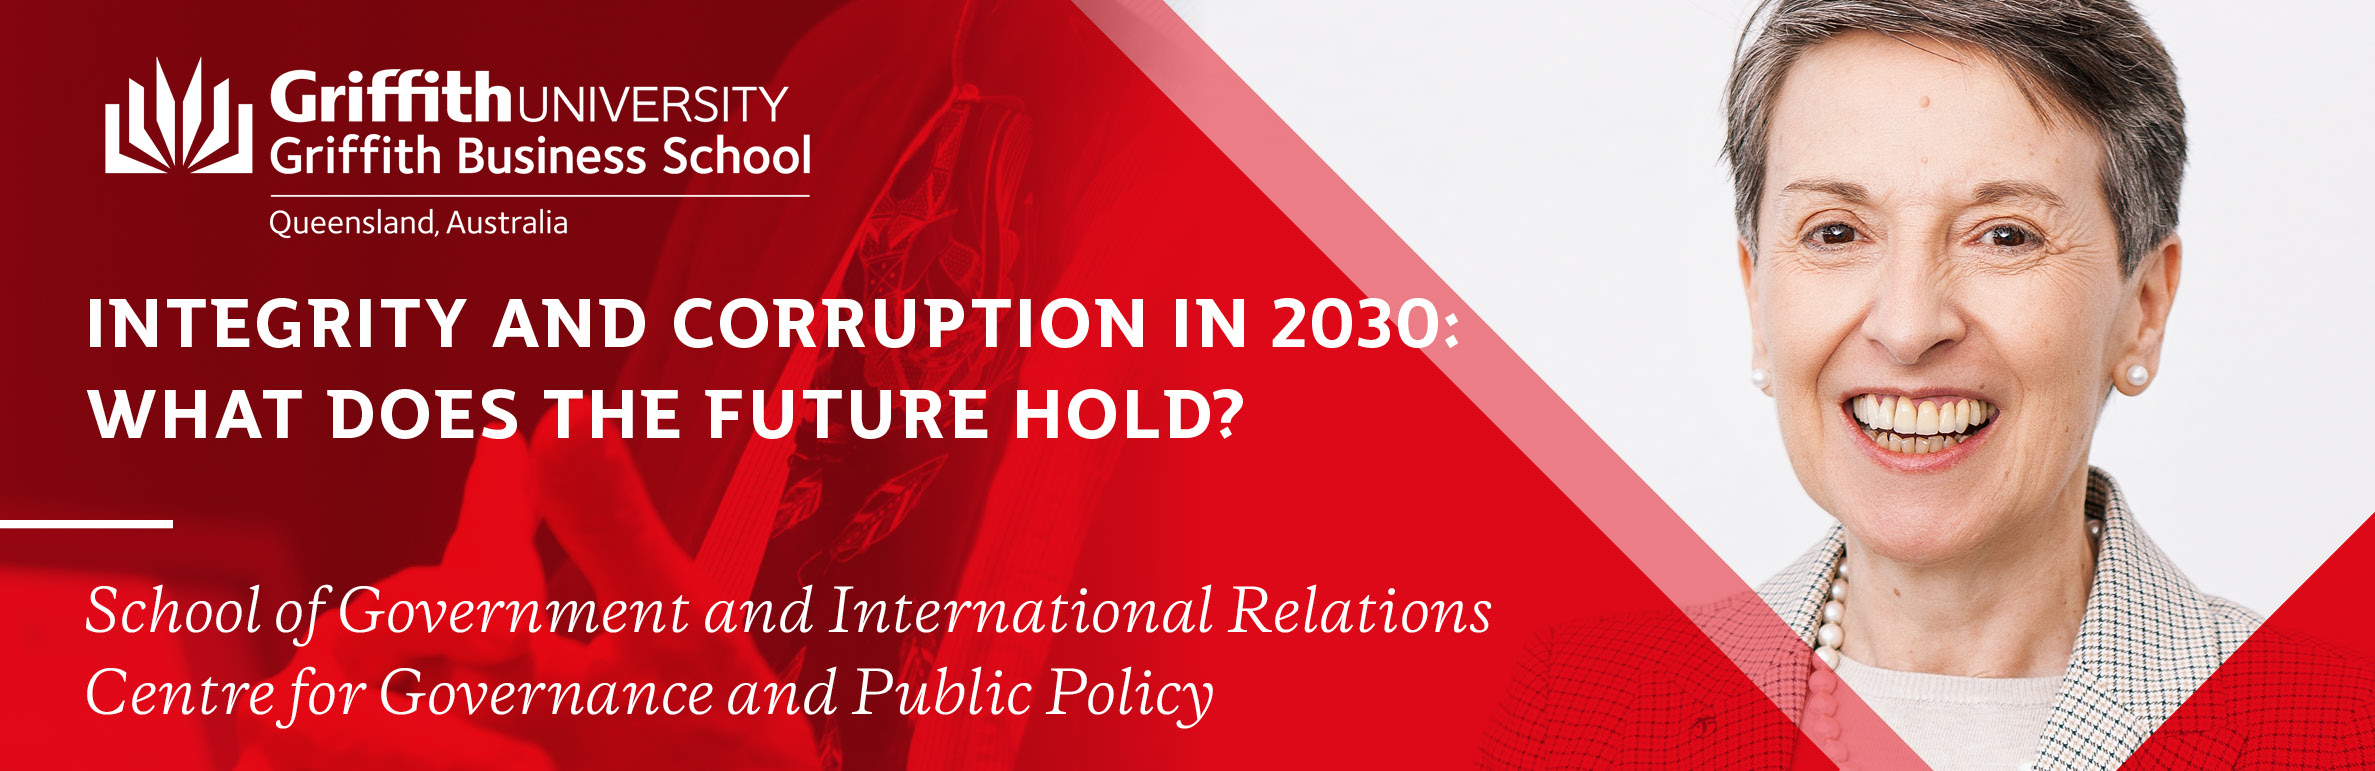 Integrity and Corruption in 2030: What does the future hold? 